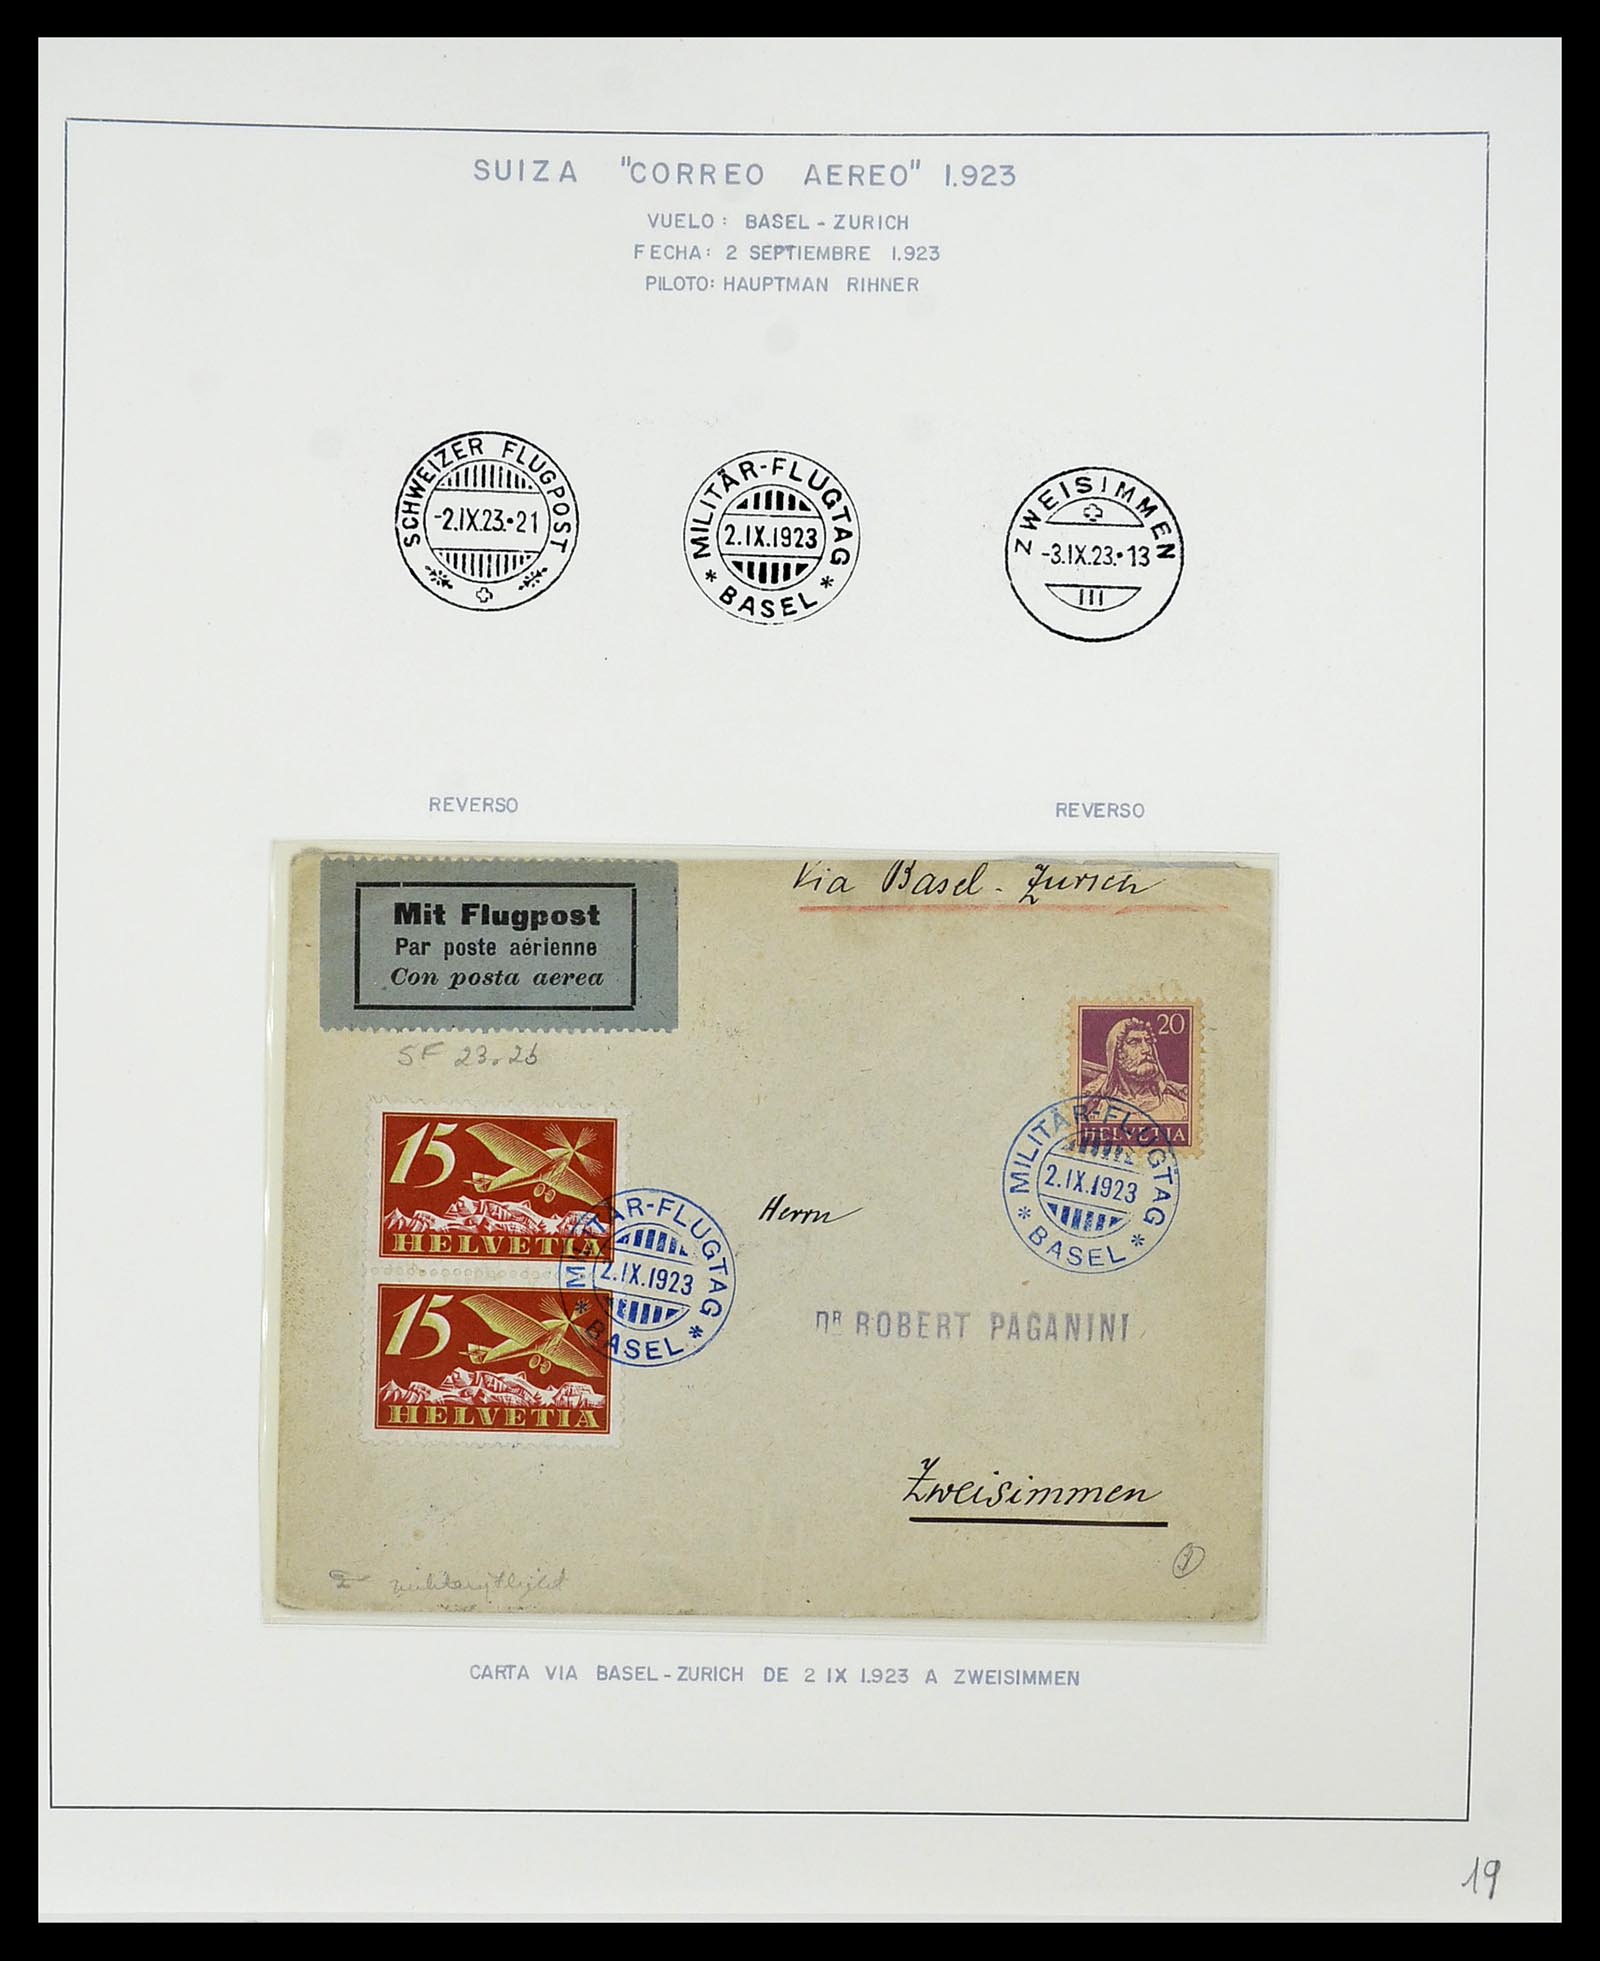 34137 089 - Stamp collection 34137 Switzerland airmail covers 1923-1963.